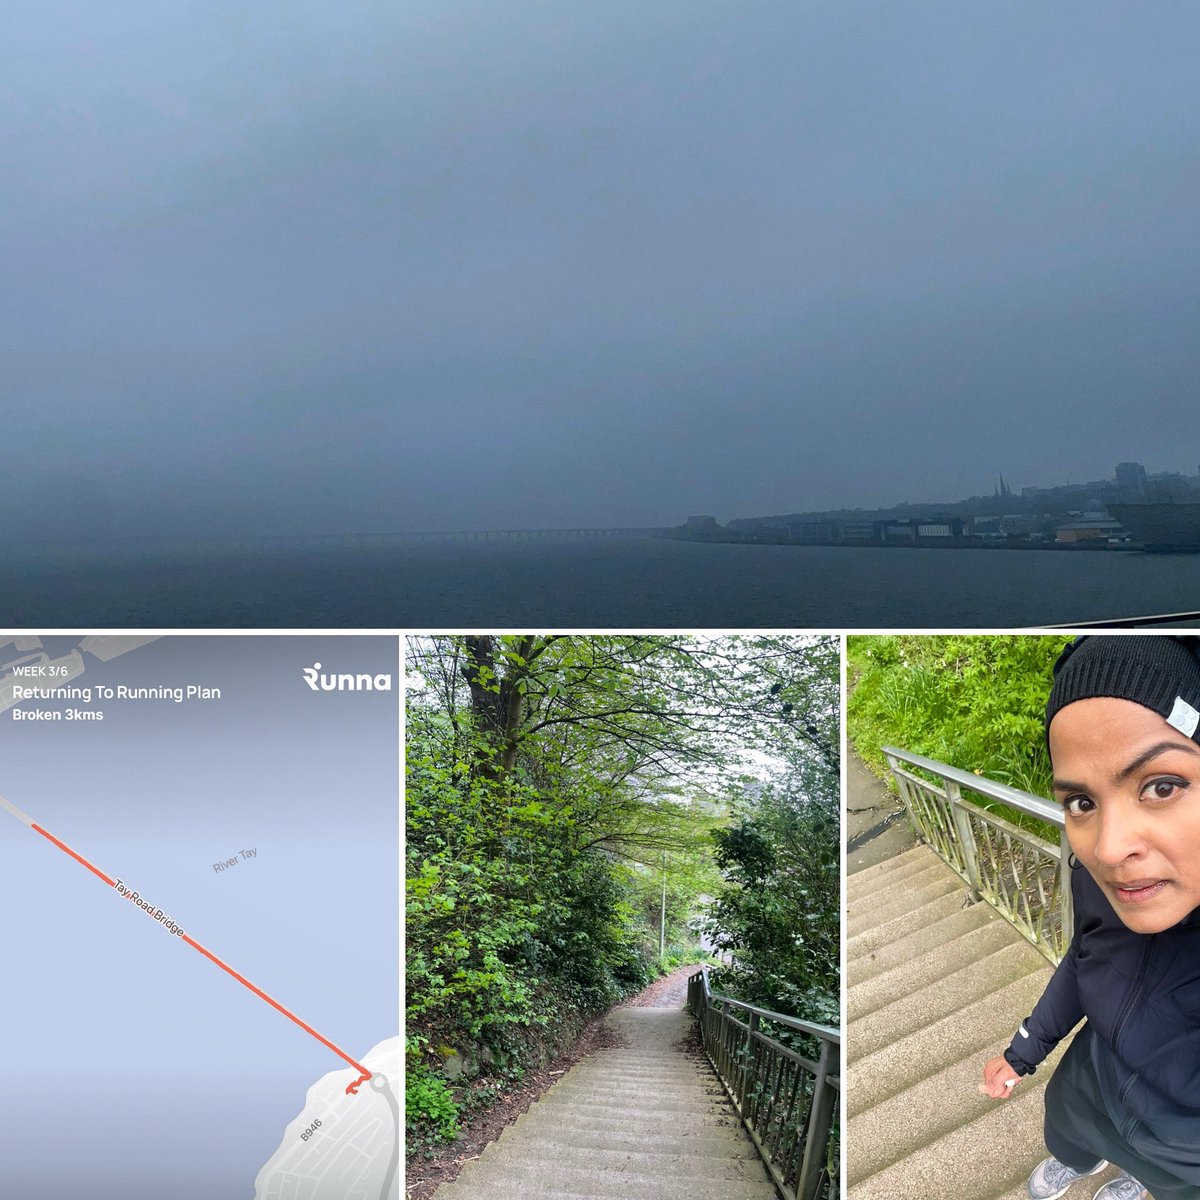 Posting for accountability. 1st #run Week 3 in my return to #running plan #runnacoach The dreich weather did not help with motivation at all 🌧️ ( the #tayrailbridge vanished) but it was ☑️ Trying to create habits that stick. I definitely cannot rely on my motivation! 🏃🏾‍♀️#rivertay